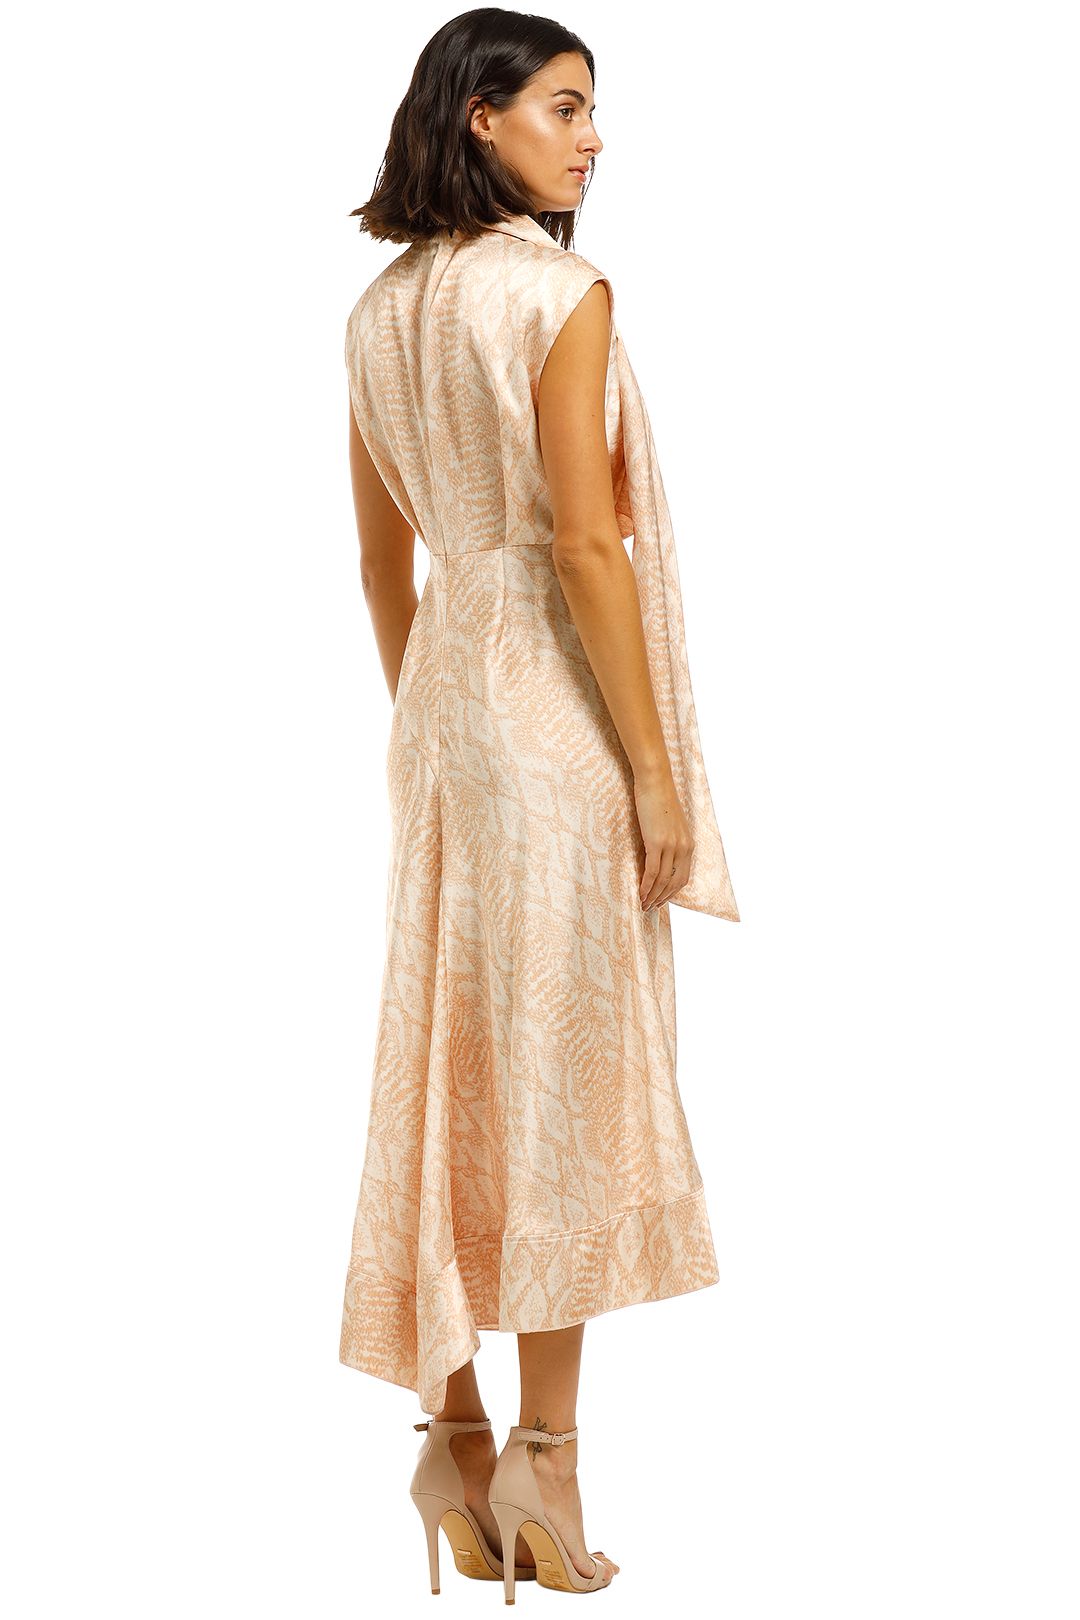 Acler-Gifford-Dress-Back